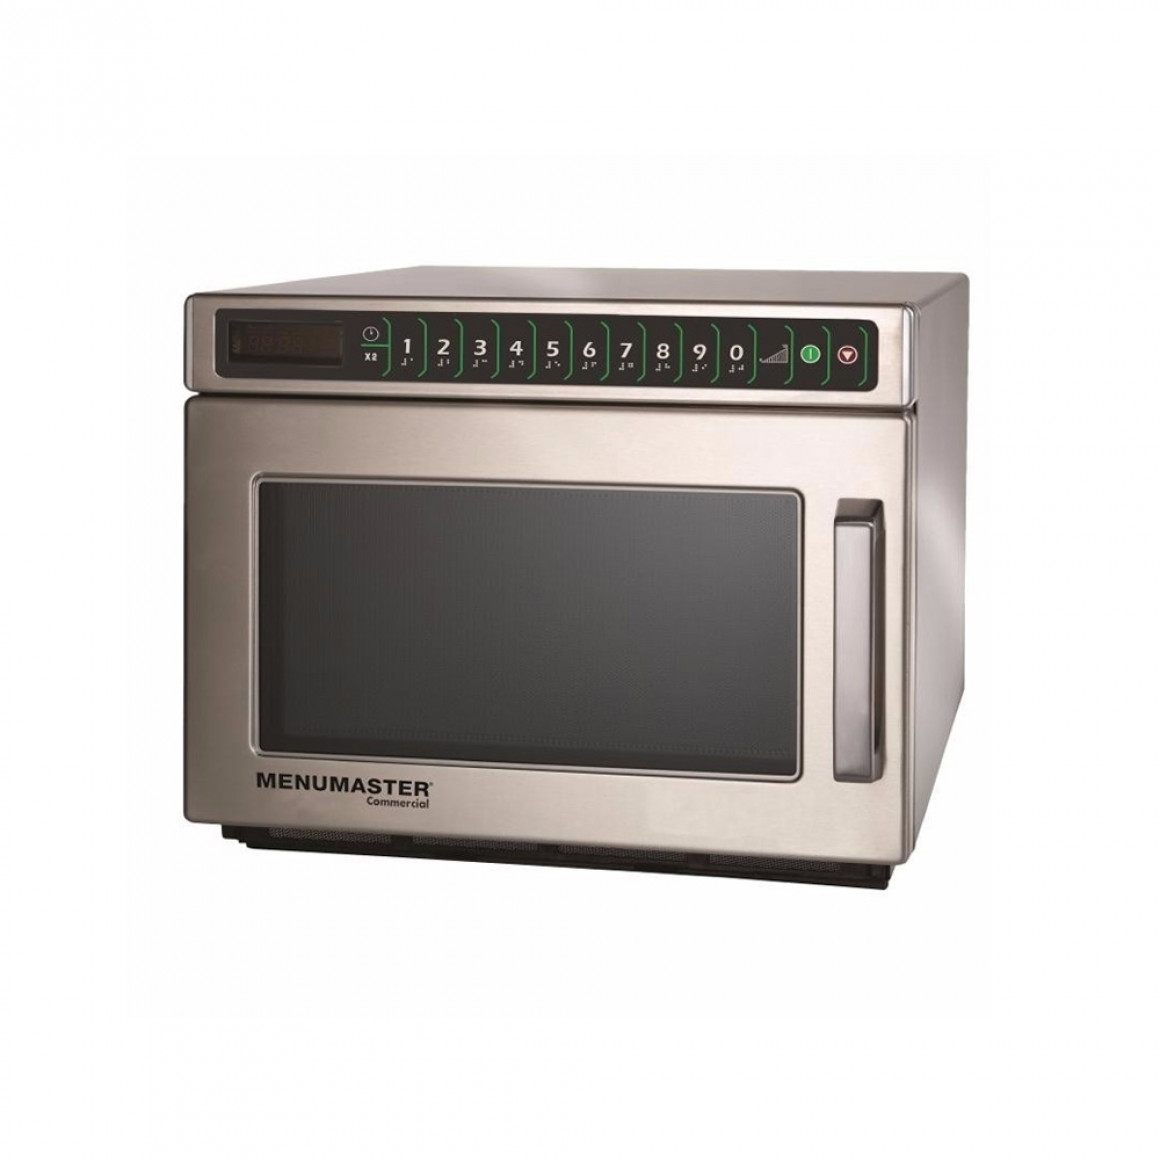 Microwave oven Heavy Duty Compact - CM735